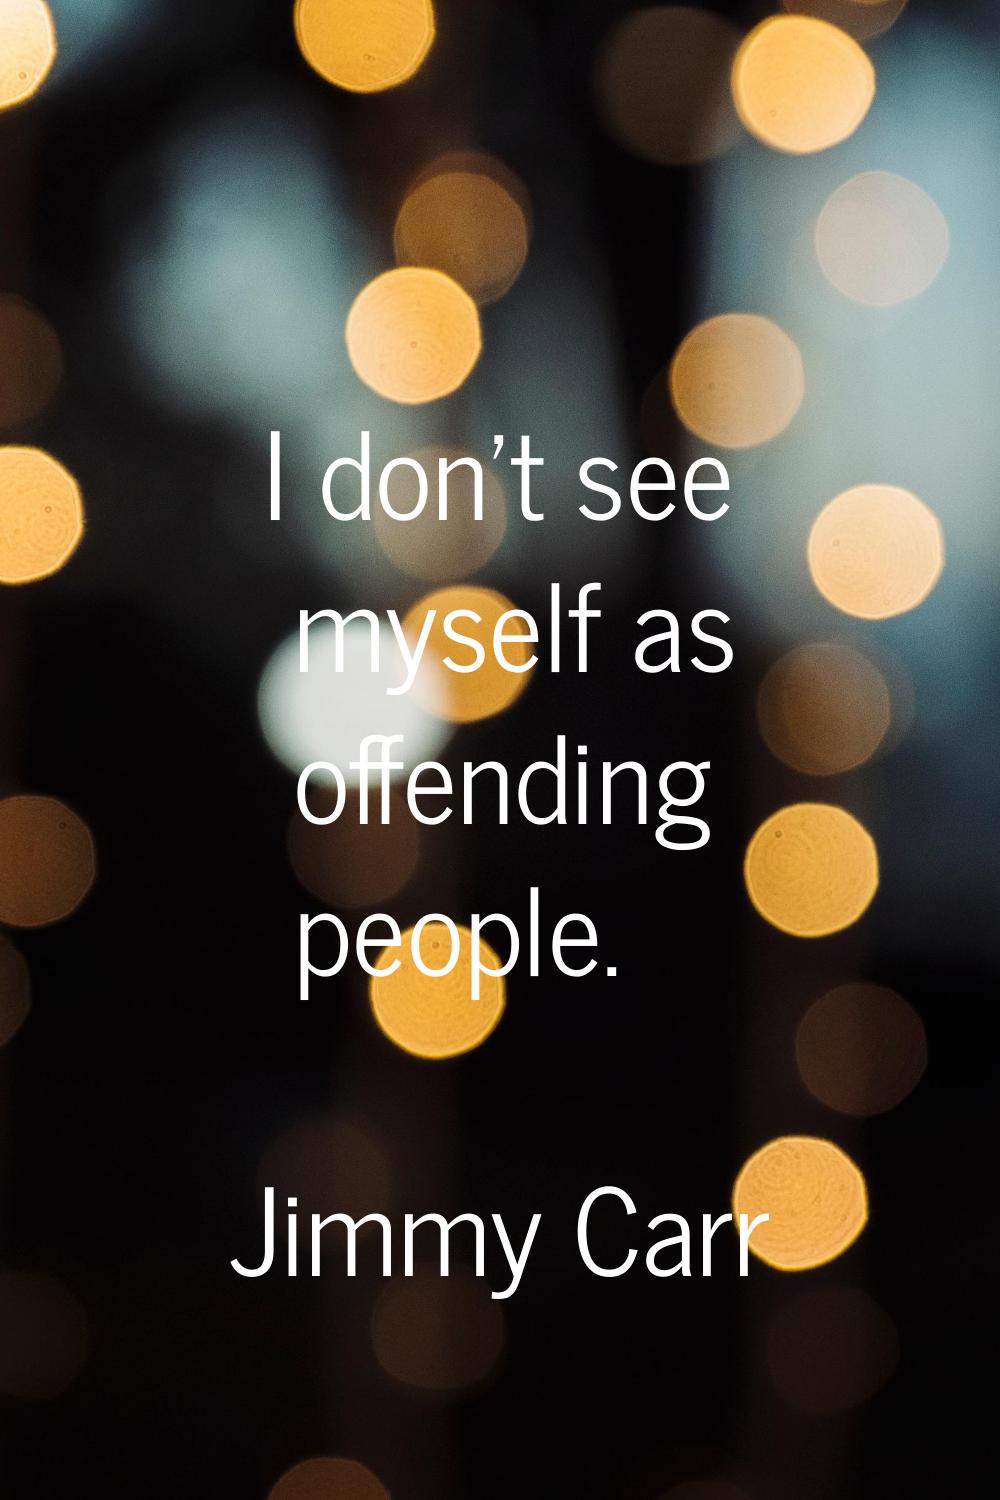 I don't see myself as offending people.